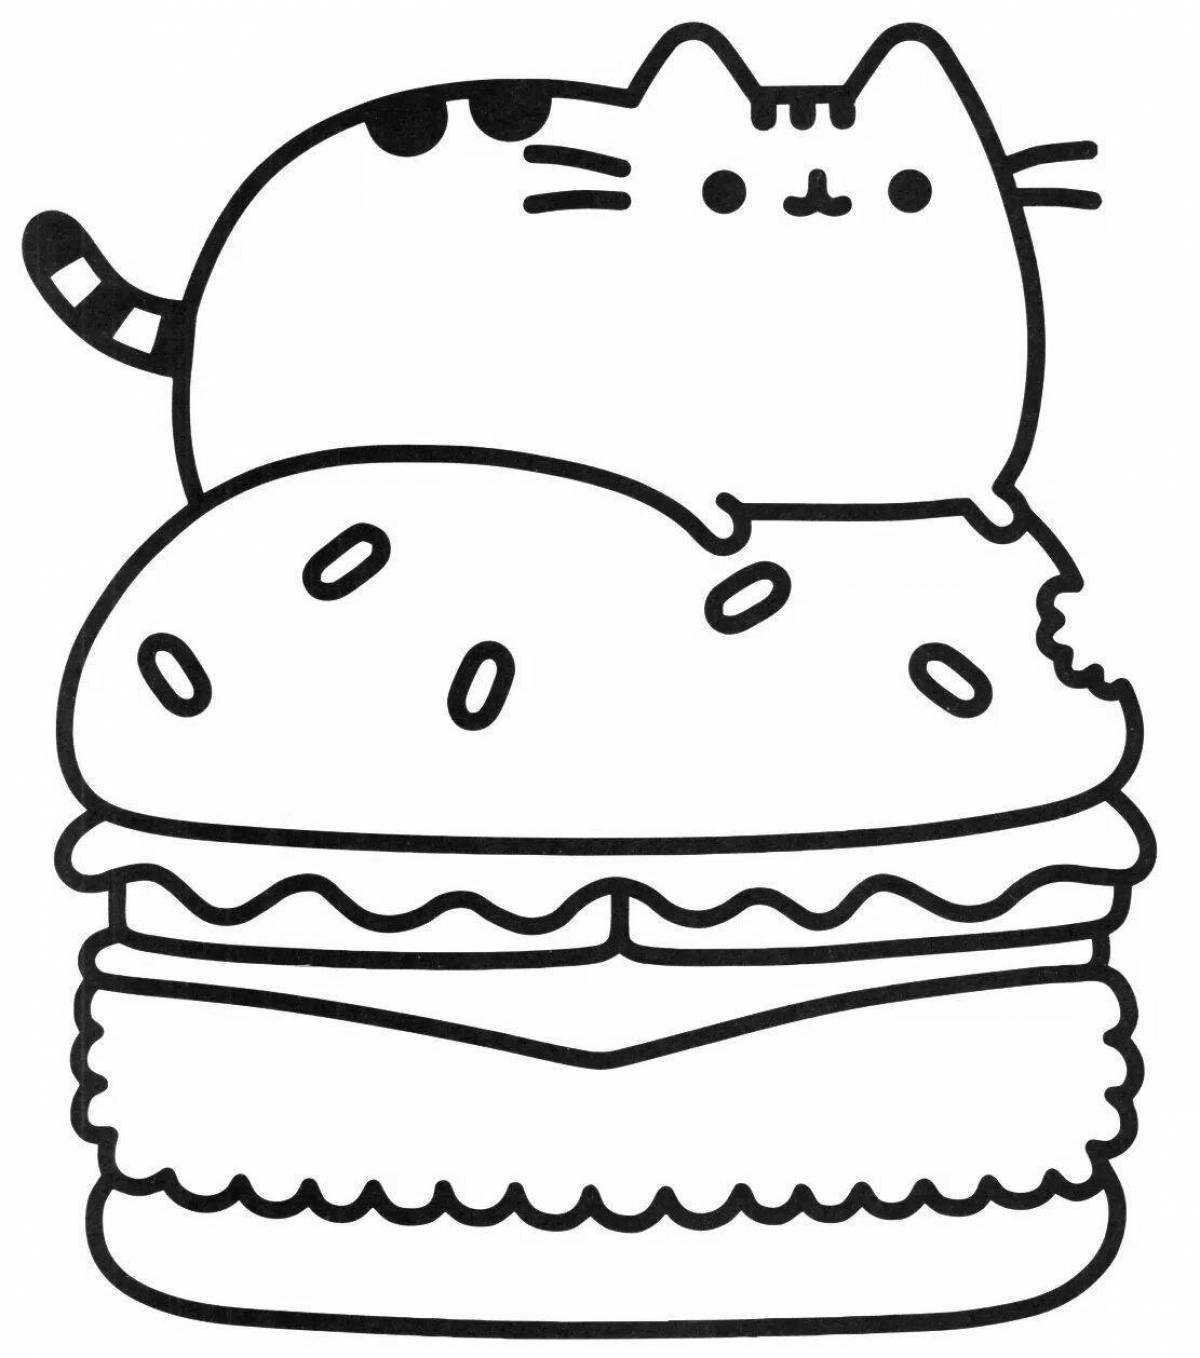 Coloring page funny donut cat